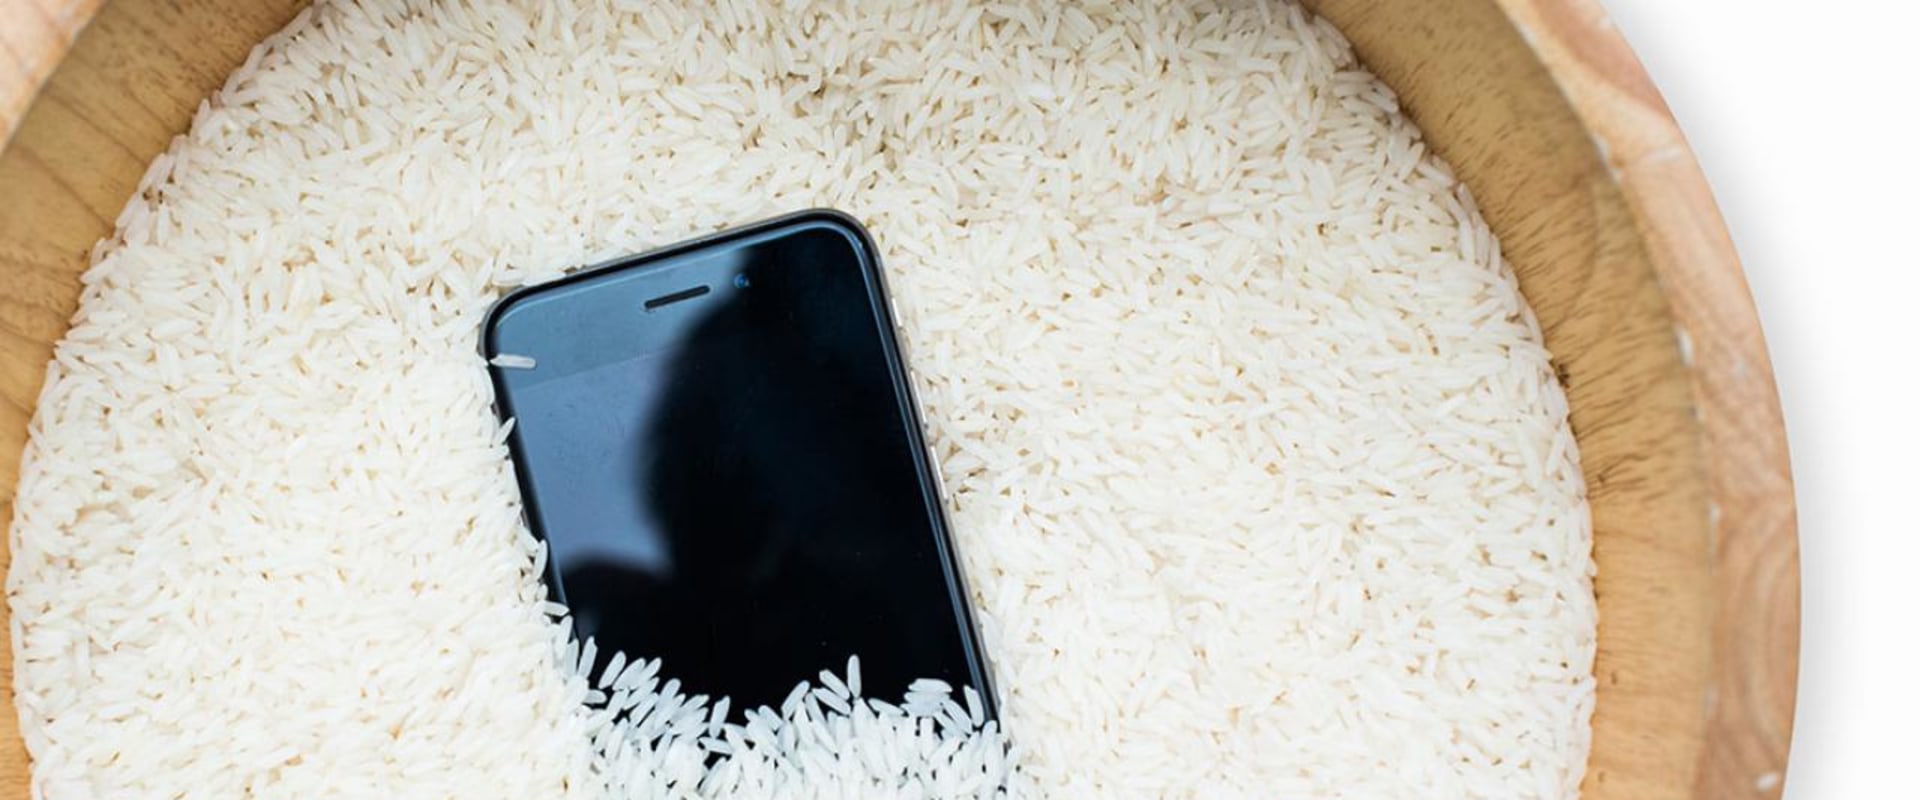 Does Water Damage to Phone Happen Instantly?